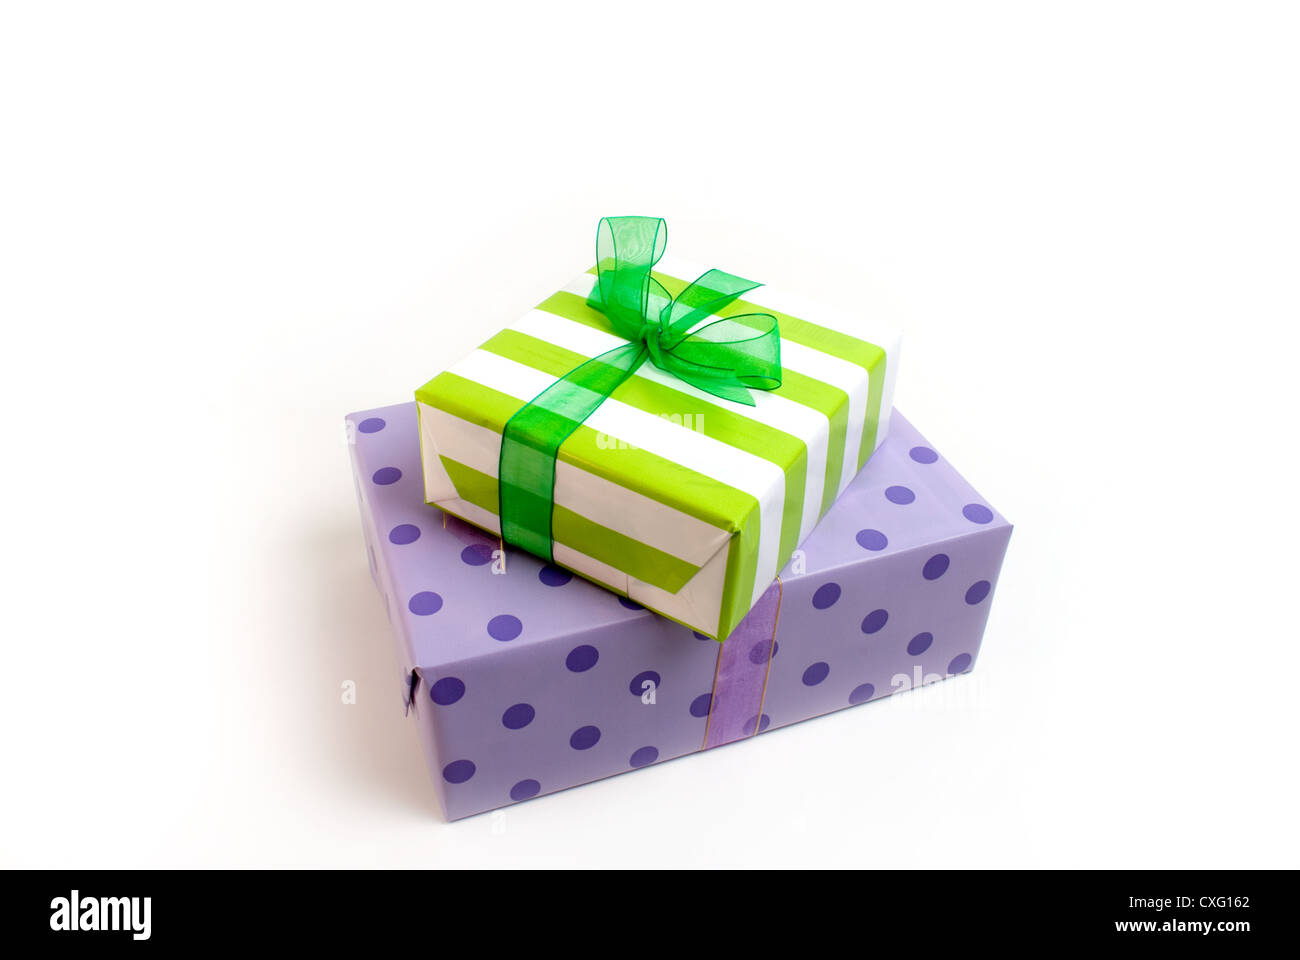 Pile of presents on white background, gift giving. Stock Photo